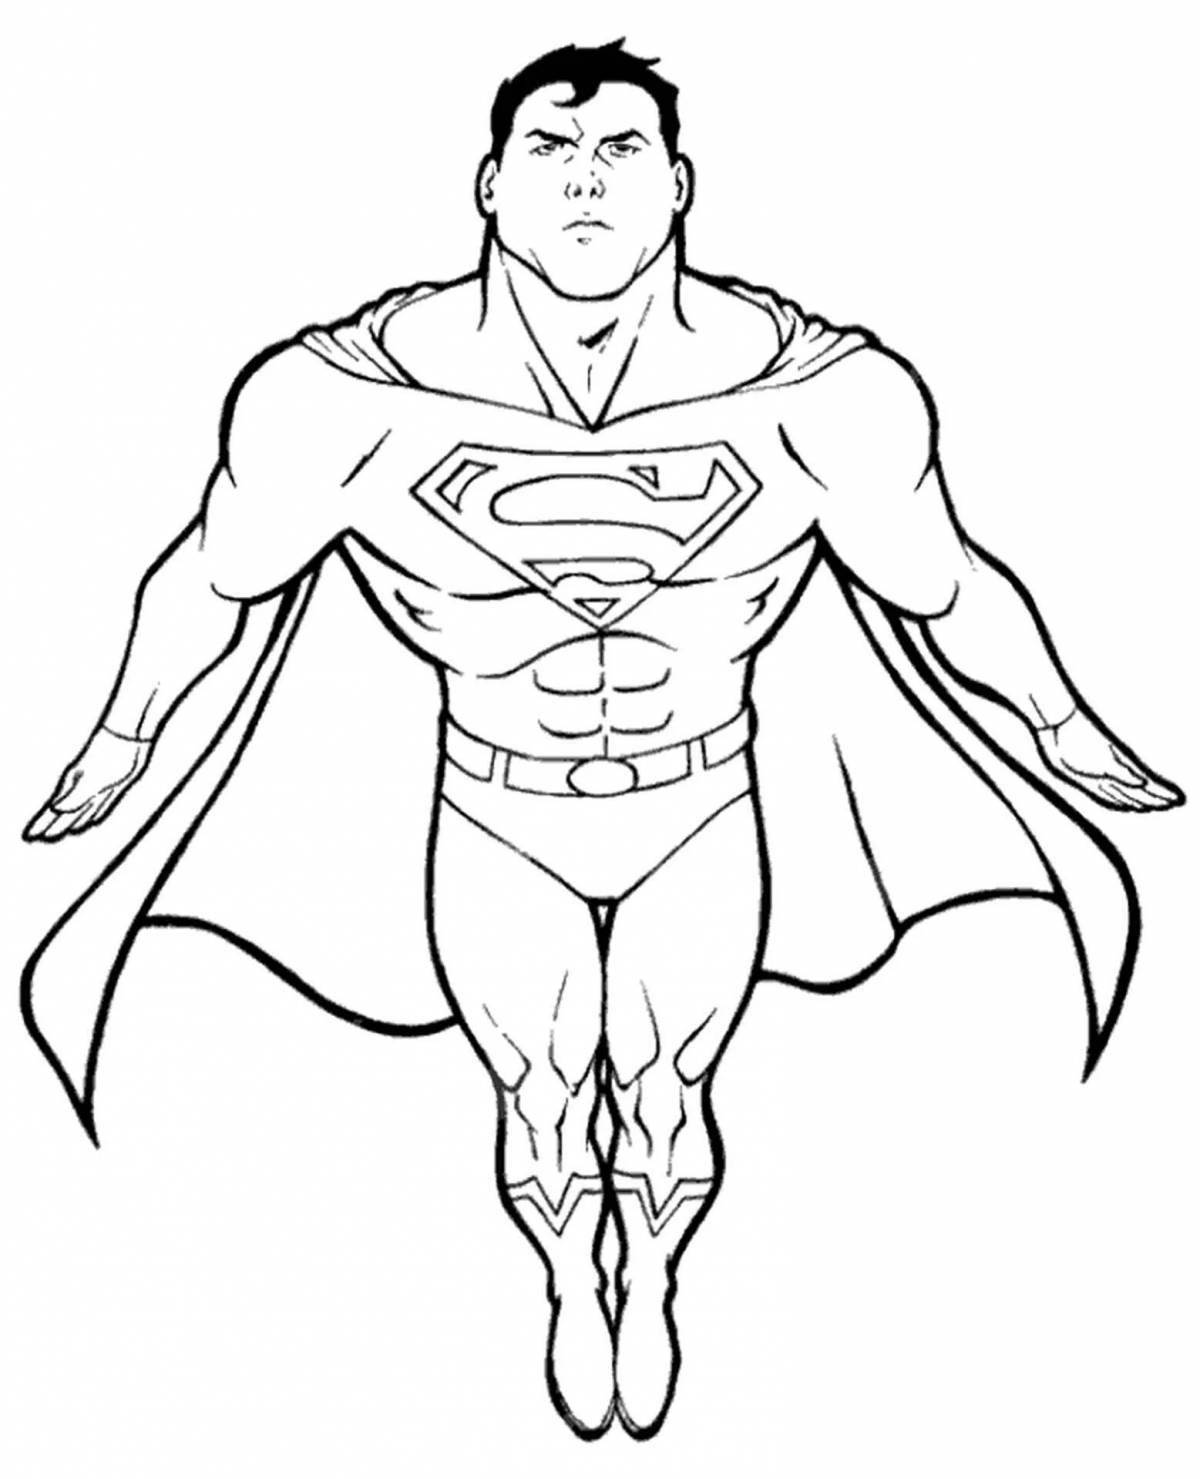 Superman deluxe coloring book